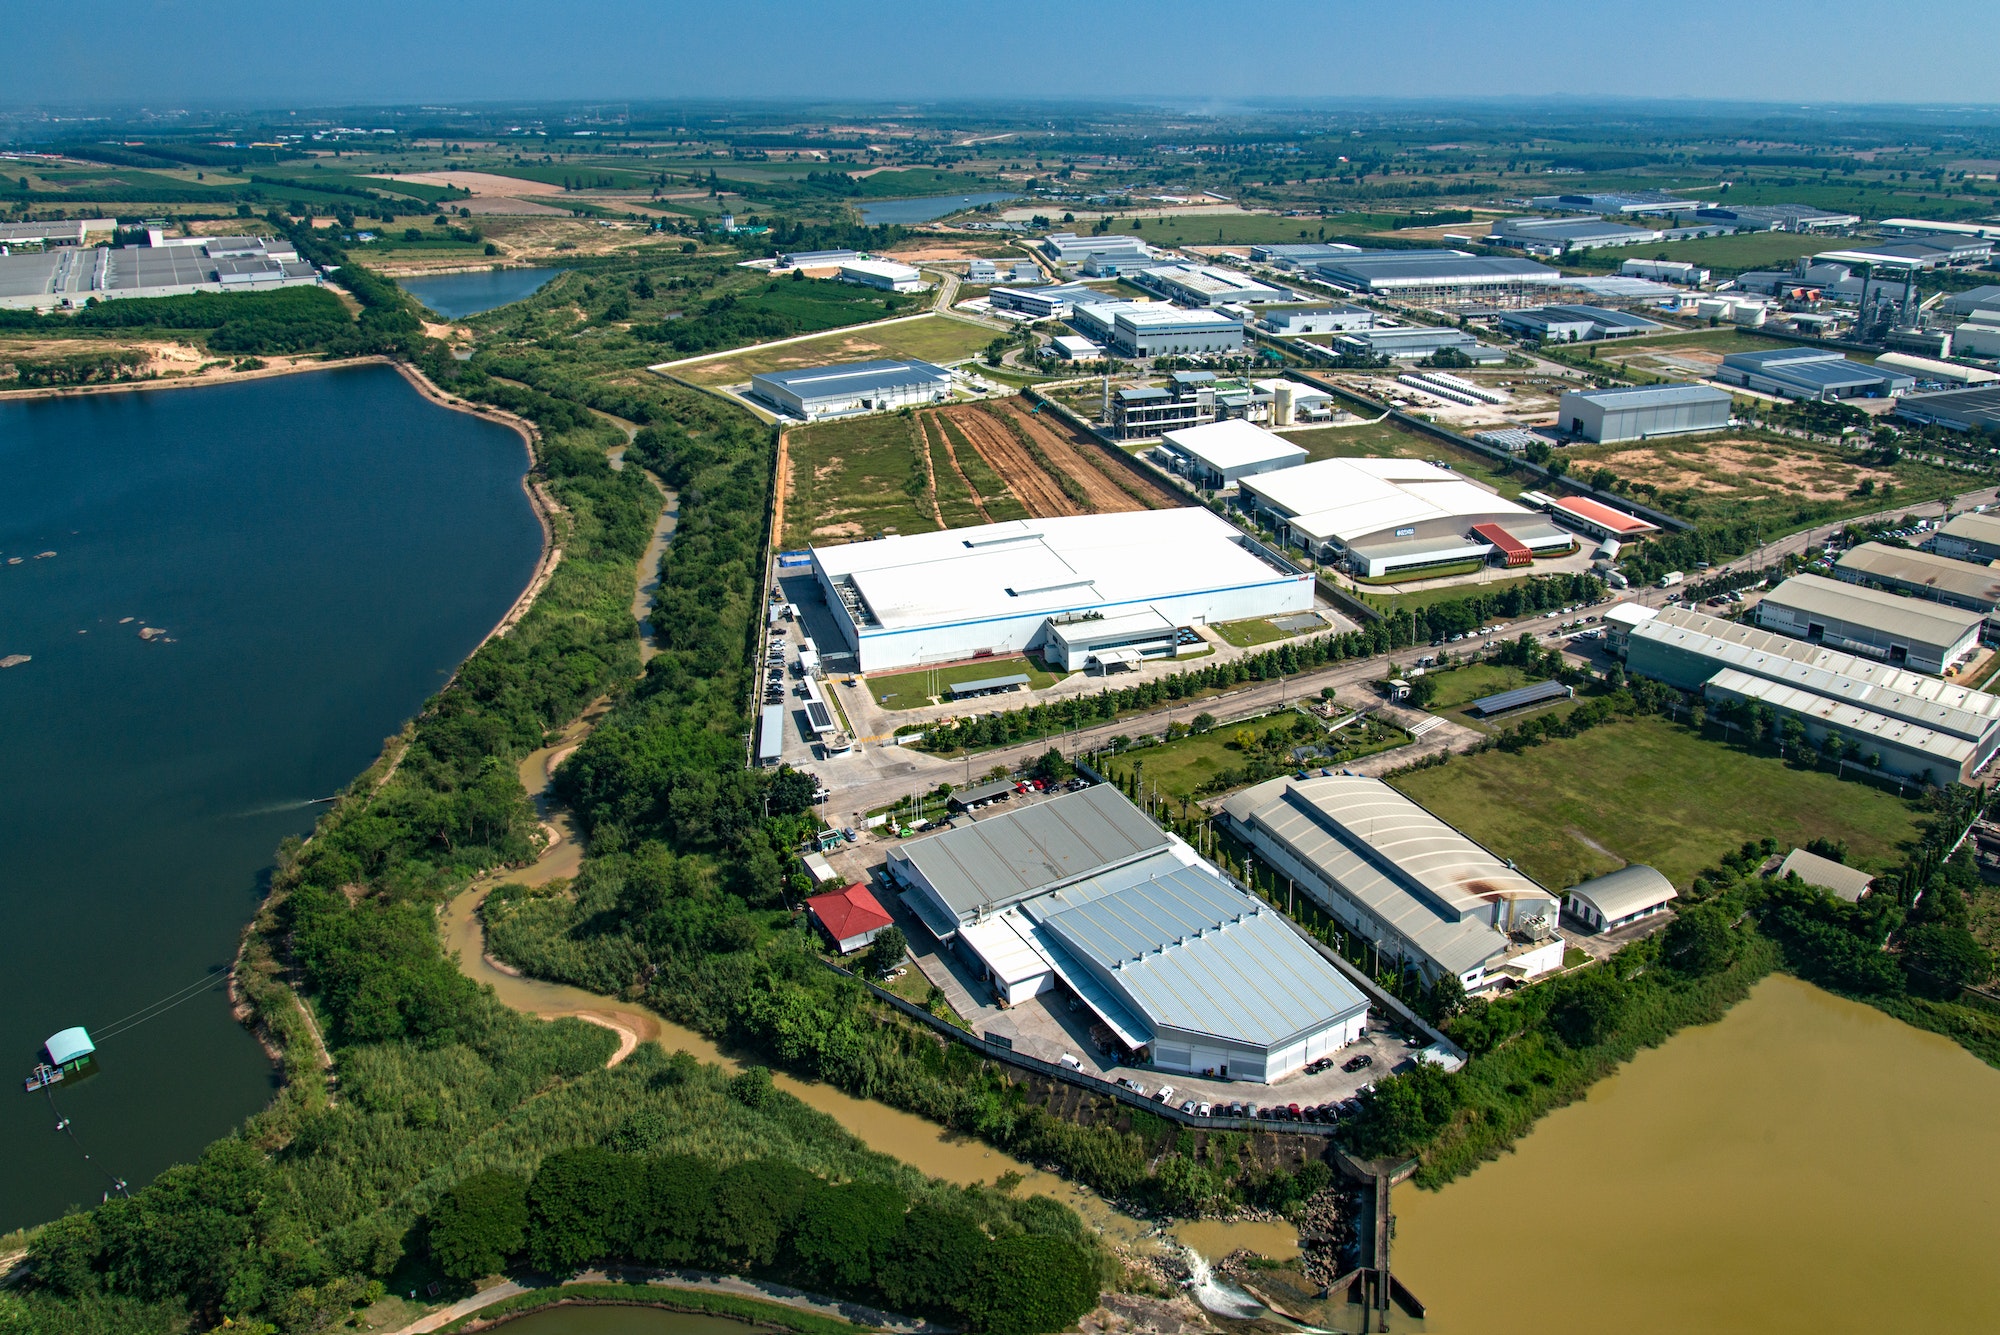 How to improve broadband connectivity for industrial estates